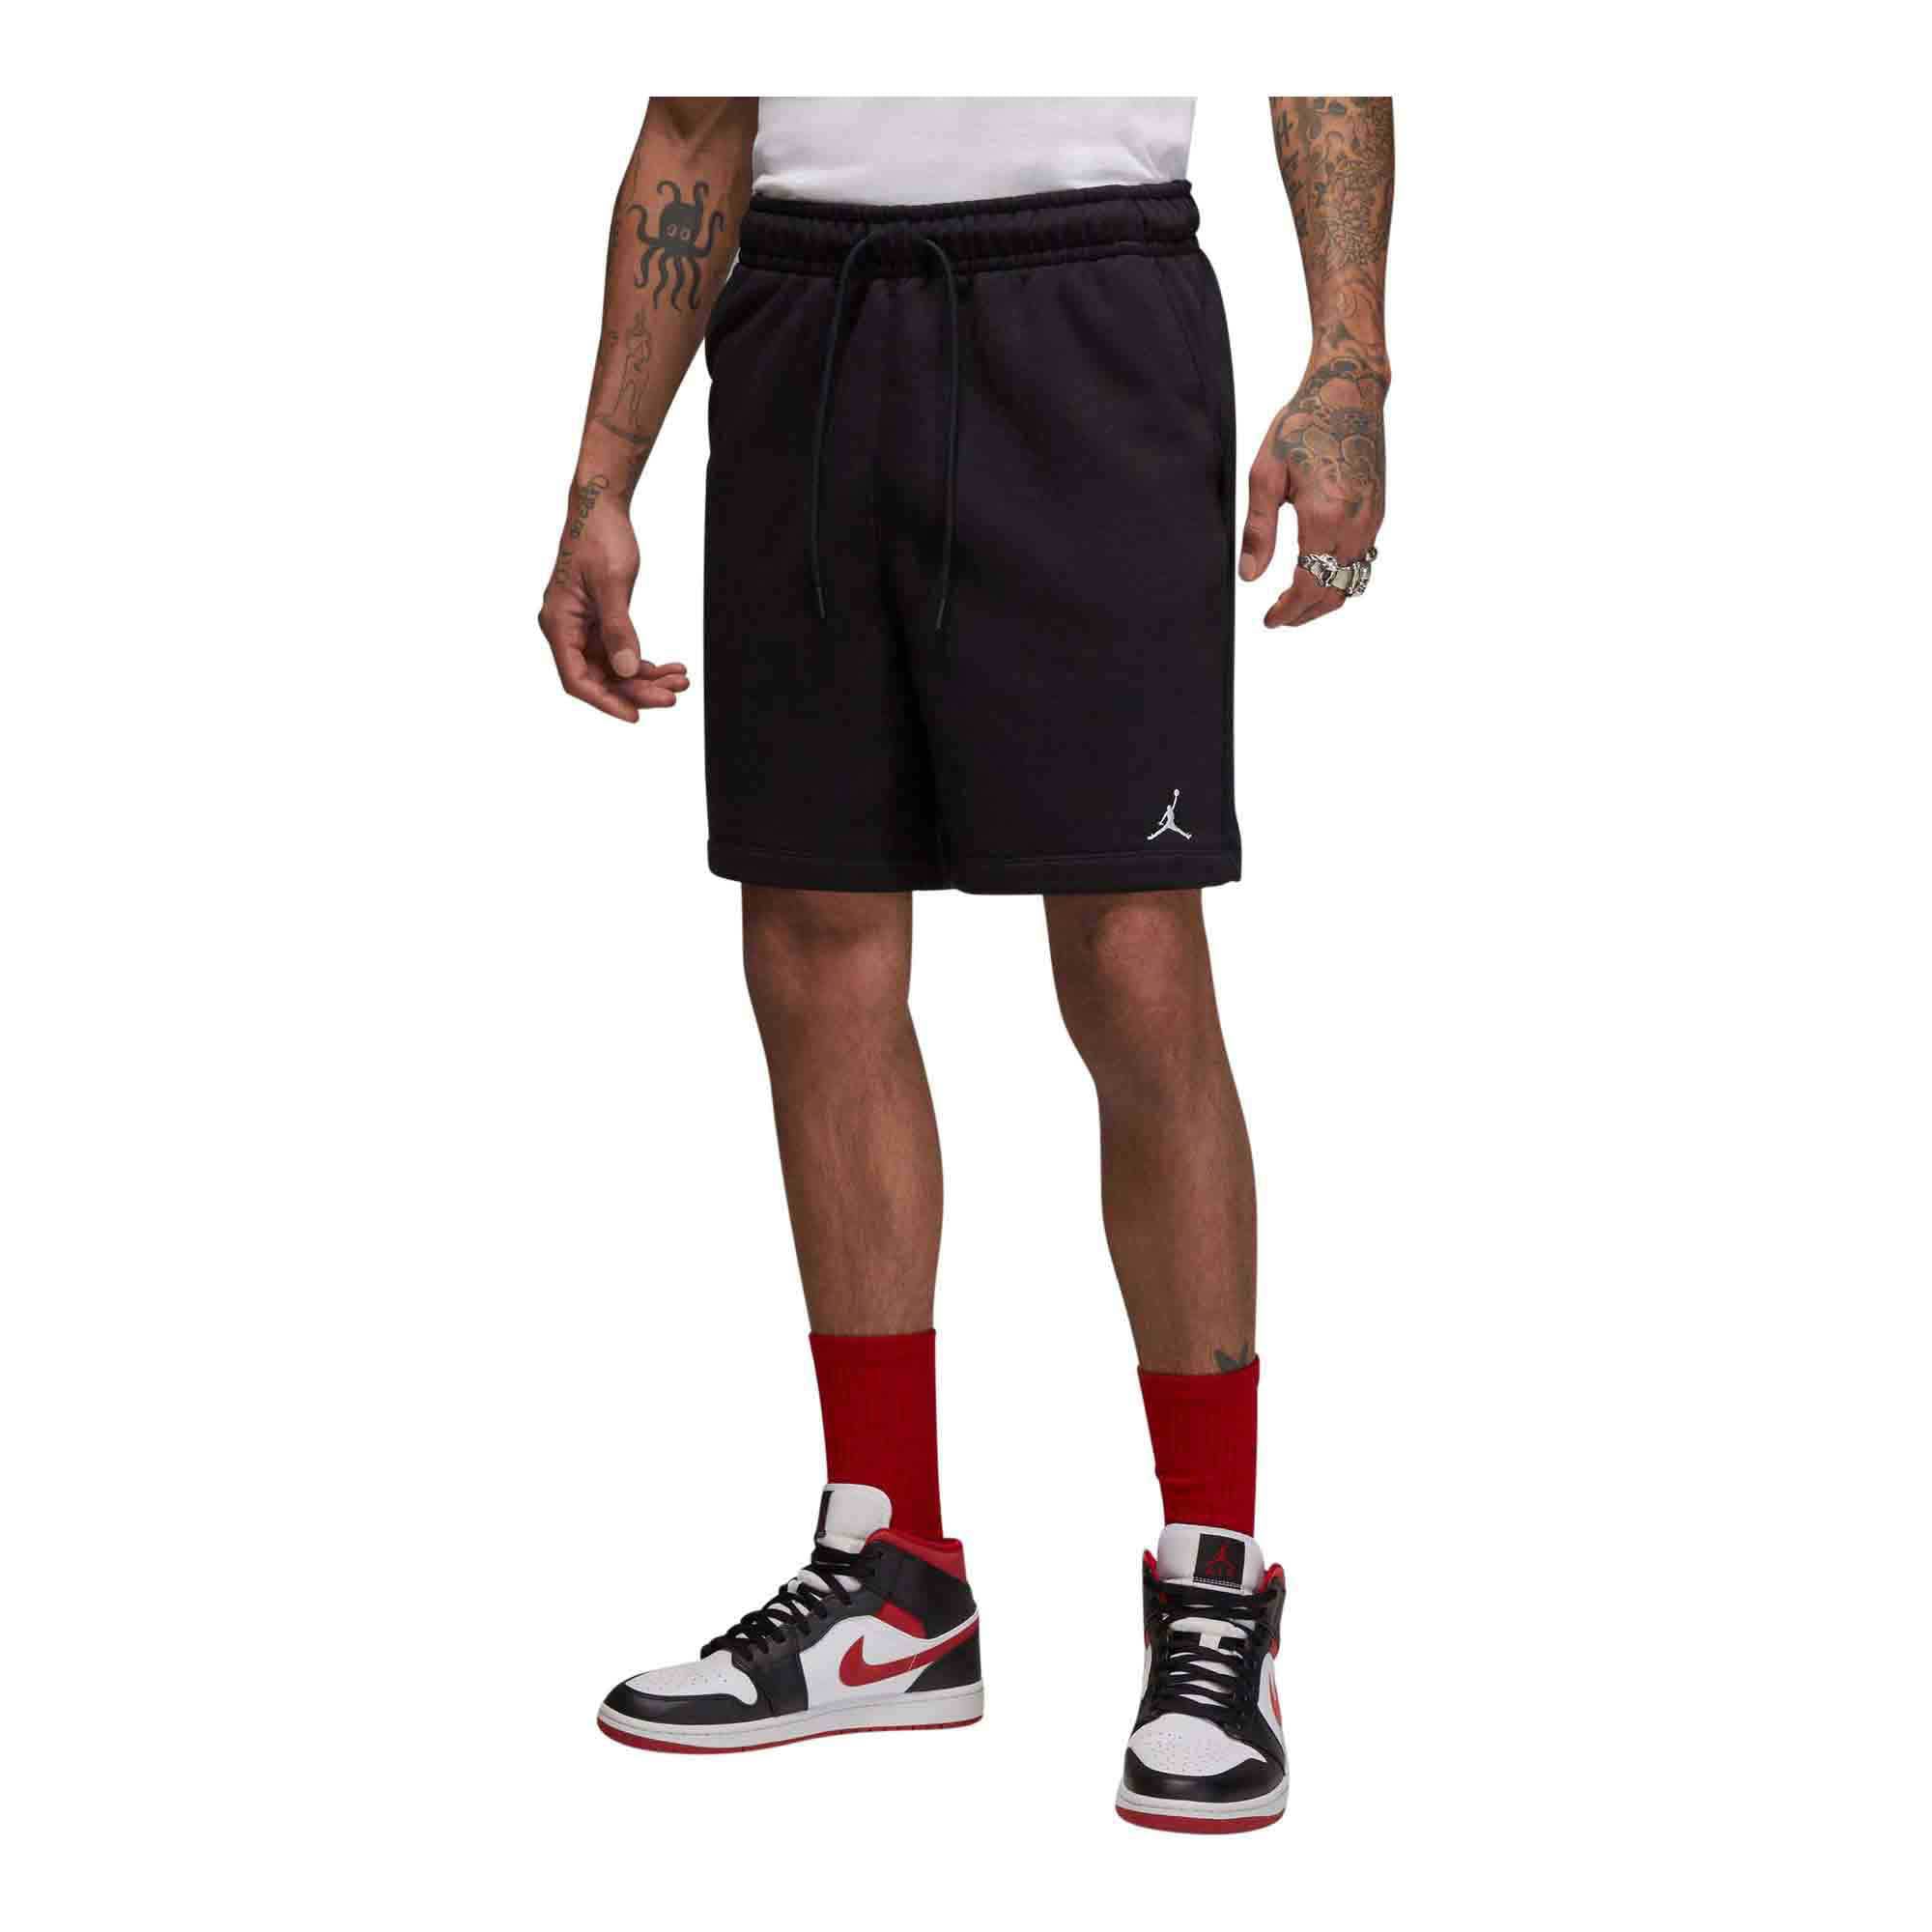 Tripack Calcetines Under Armour Heat Ultra Low Hombre Black